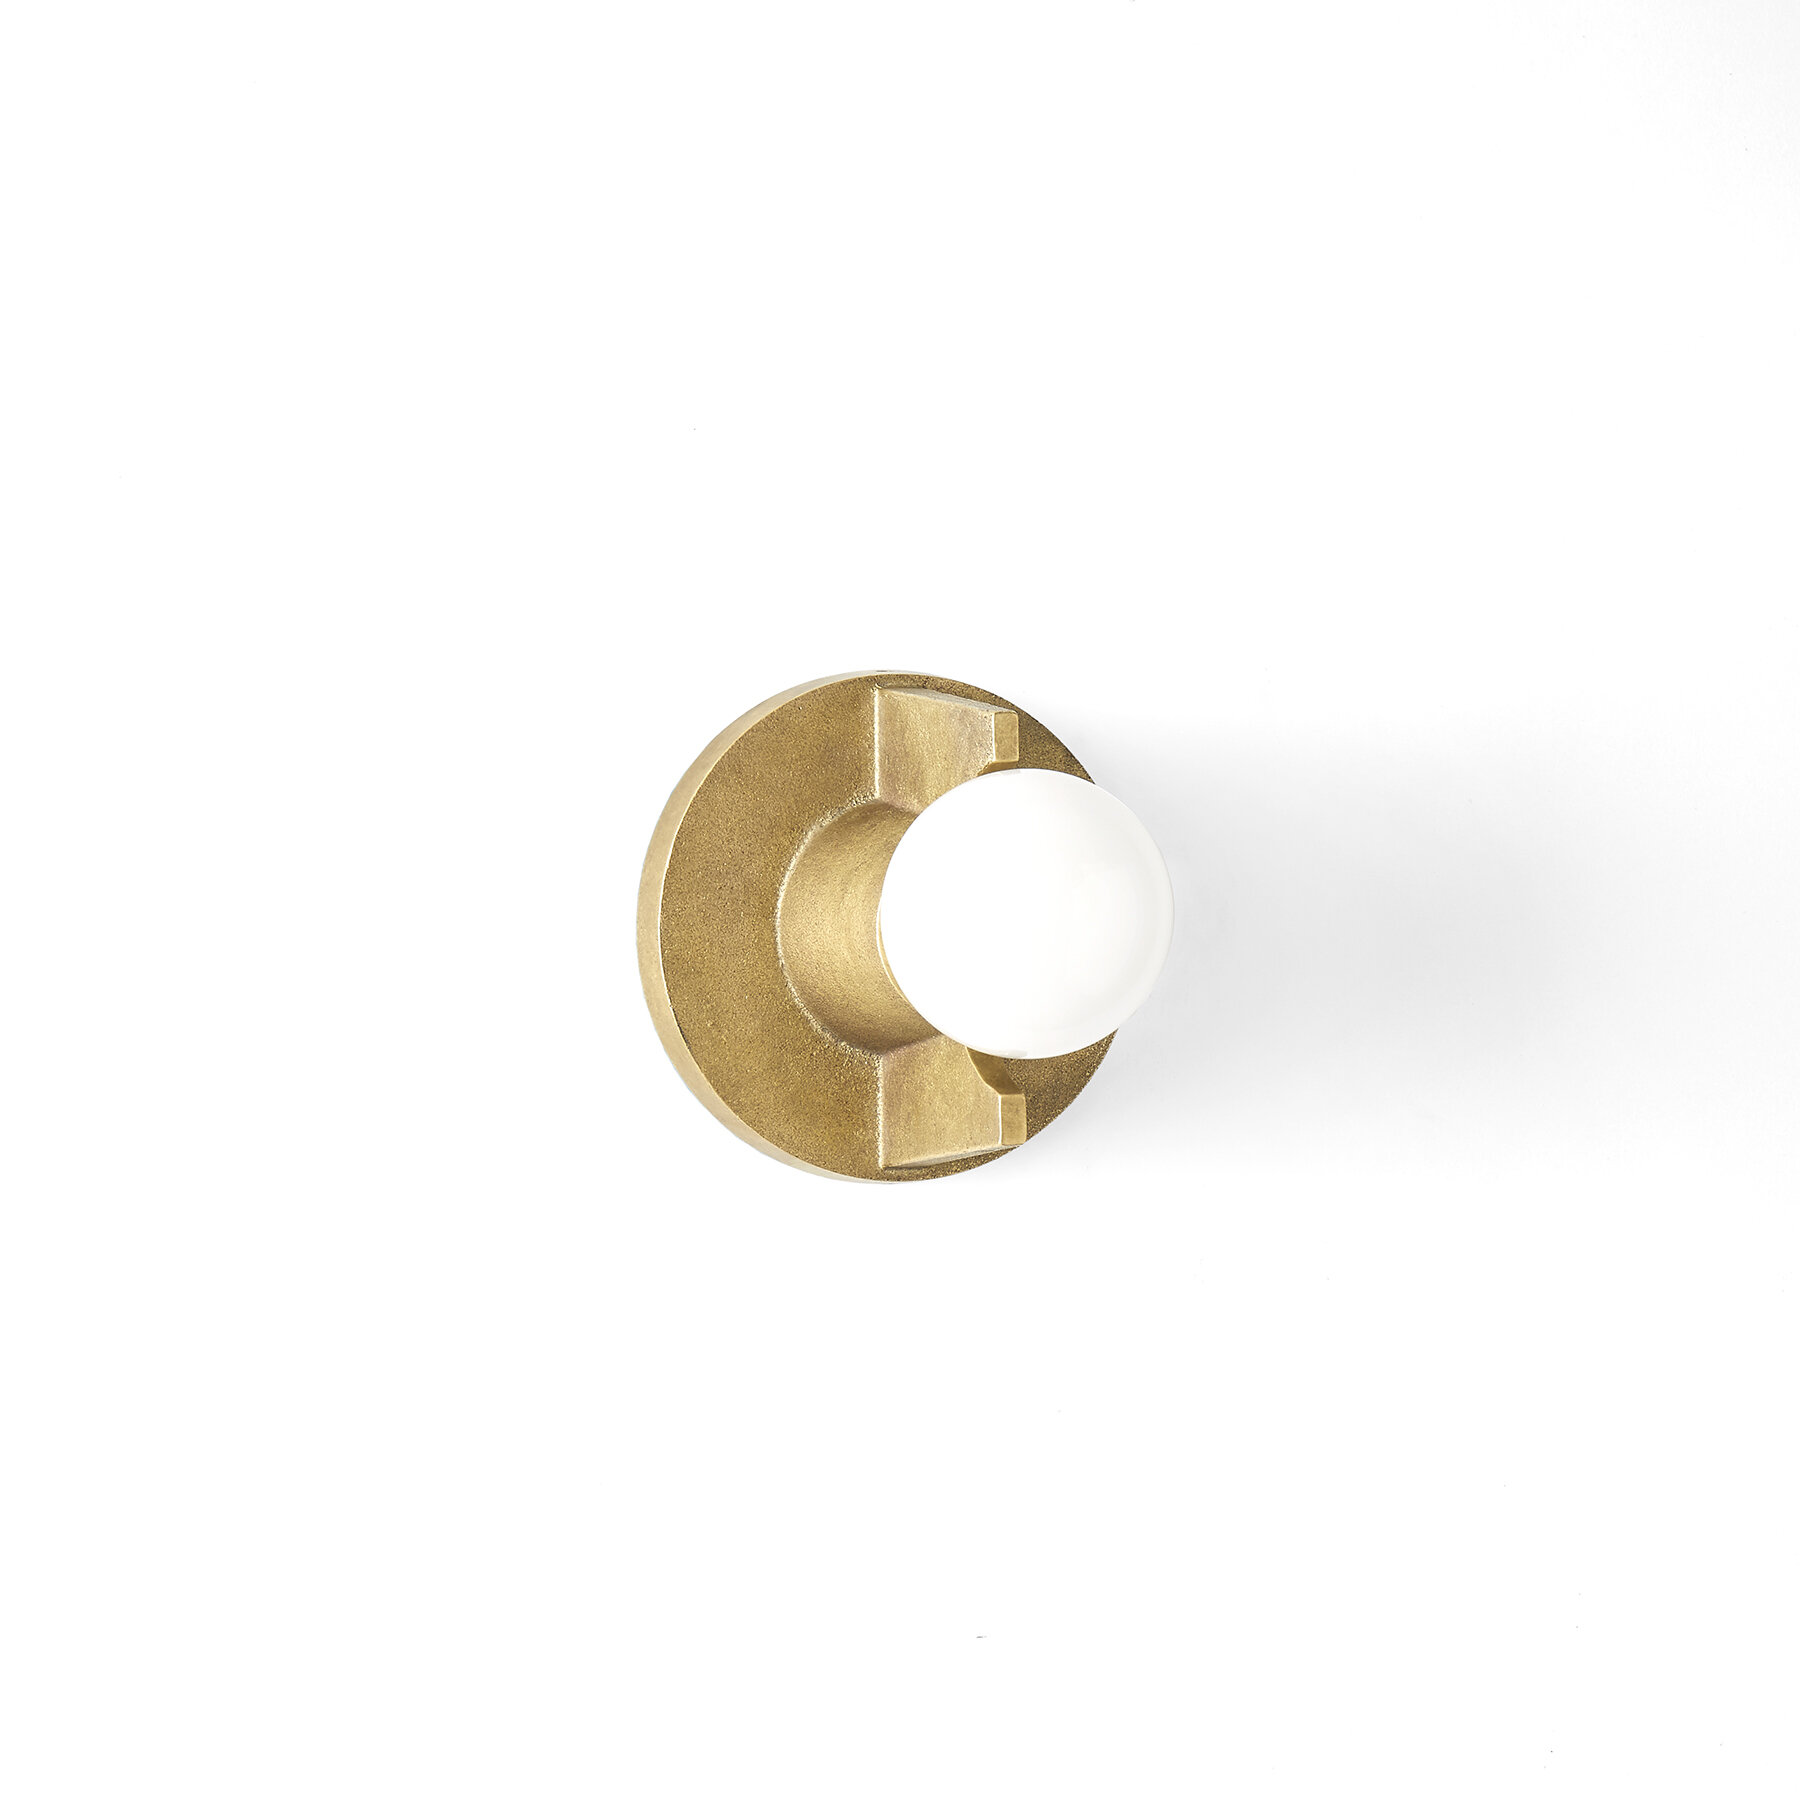 MERIDIAN SCONCE - ROUND 4.5 - $887